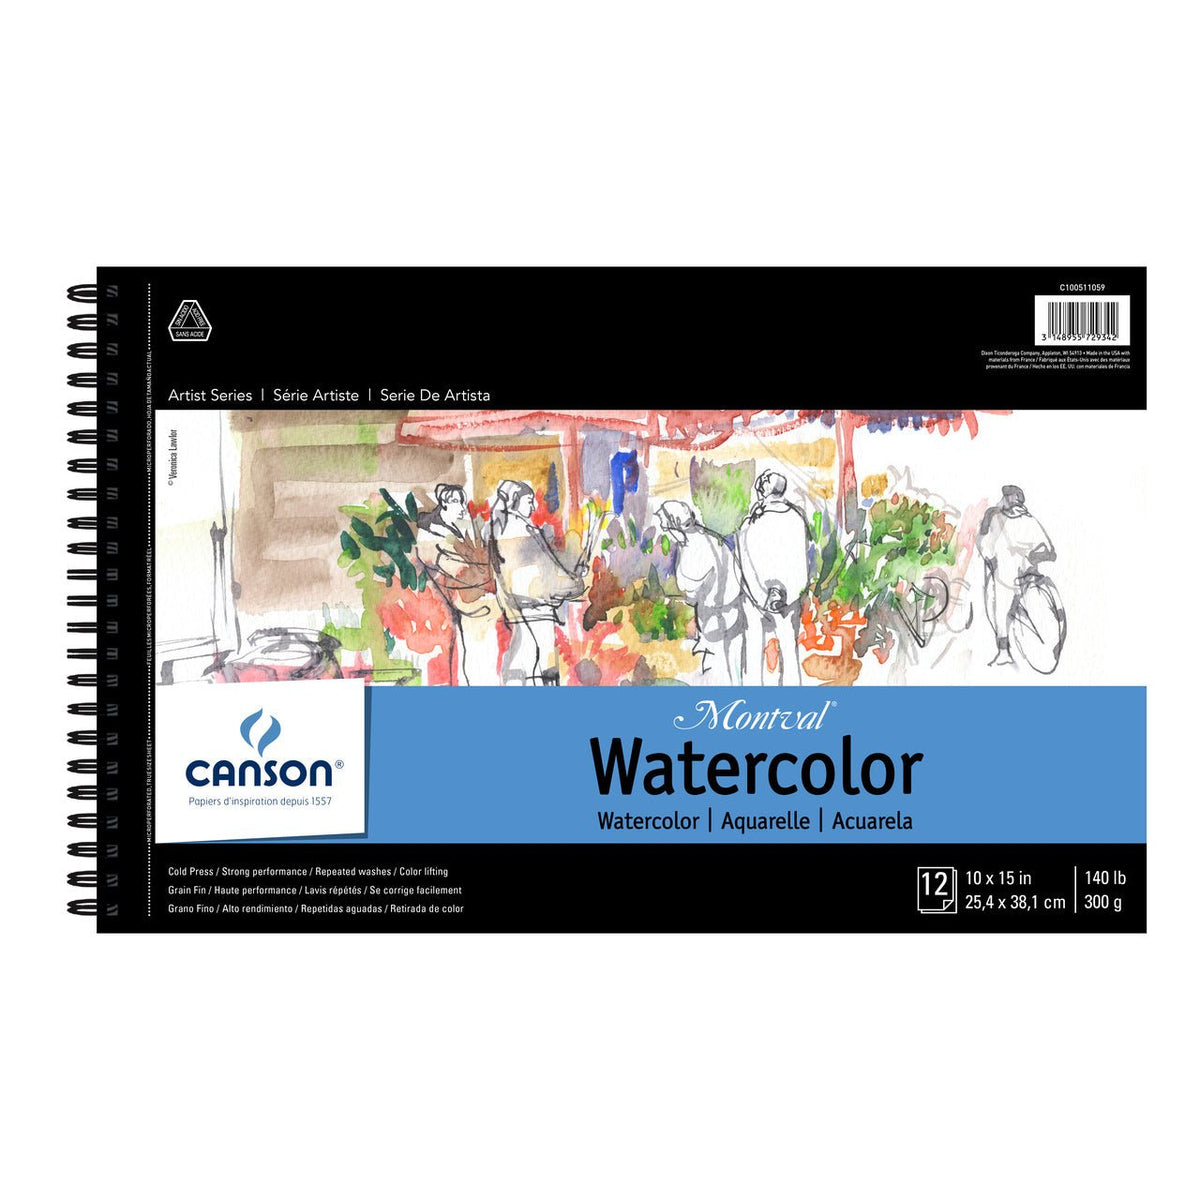 Canson XL Watercolor Pad 9X12 25 Sheets Spiral Bound Pad Cold Press